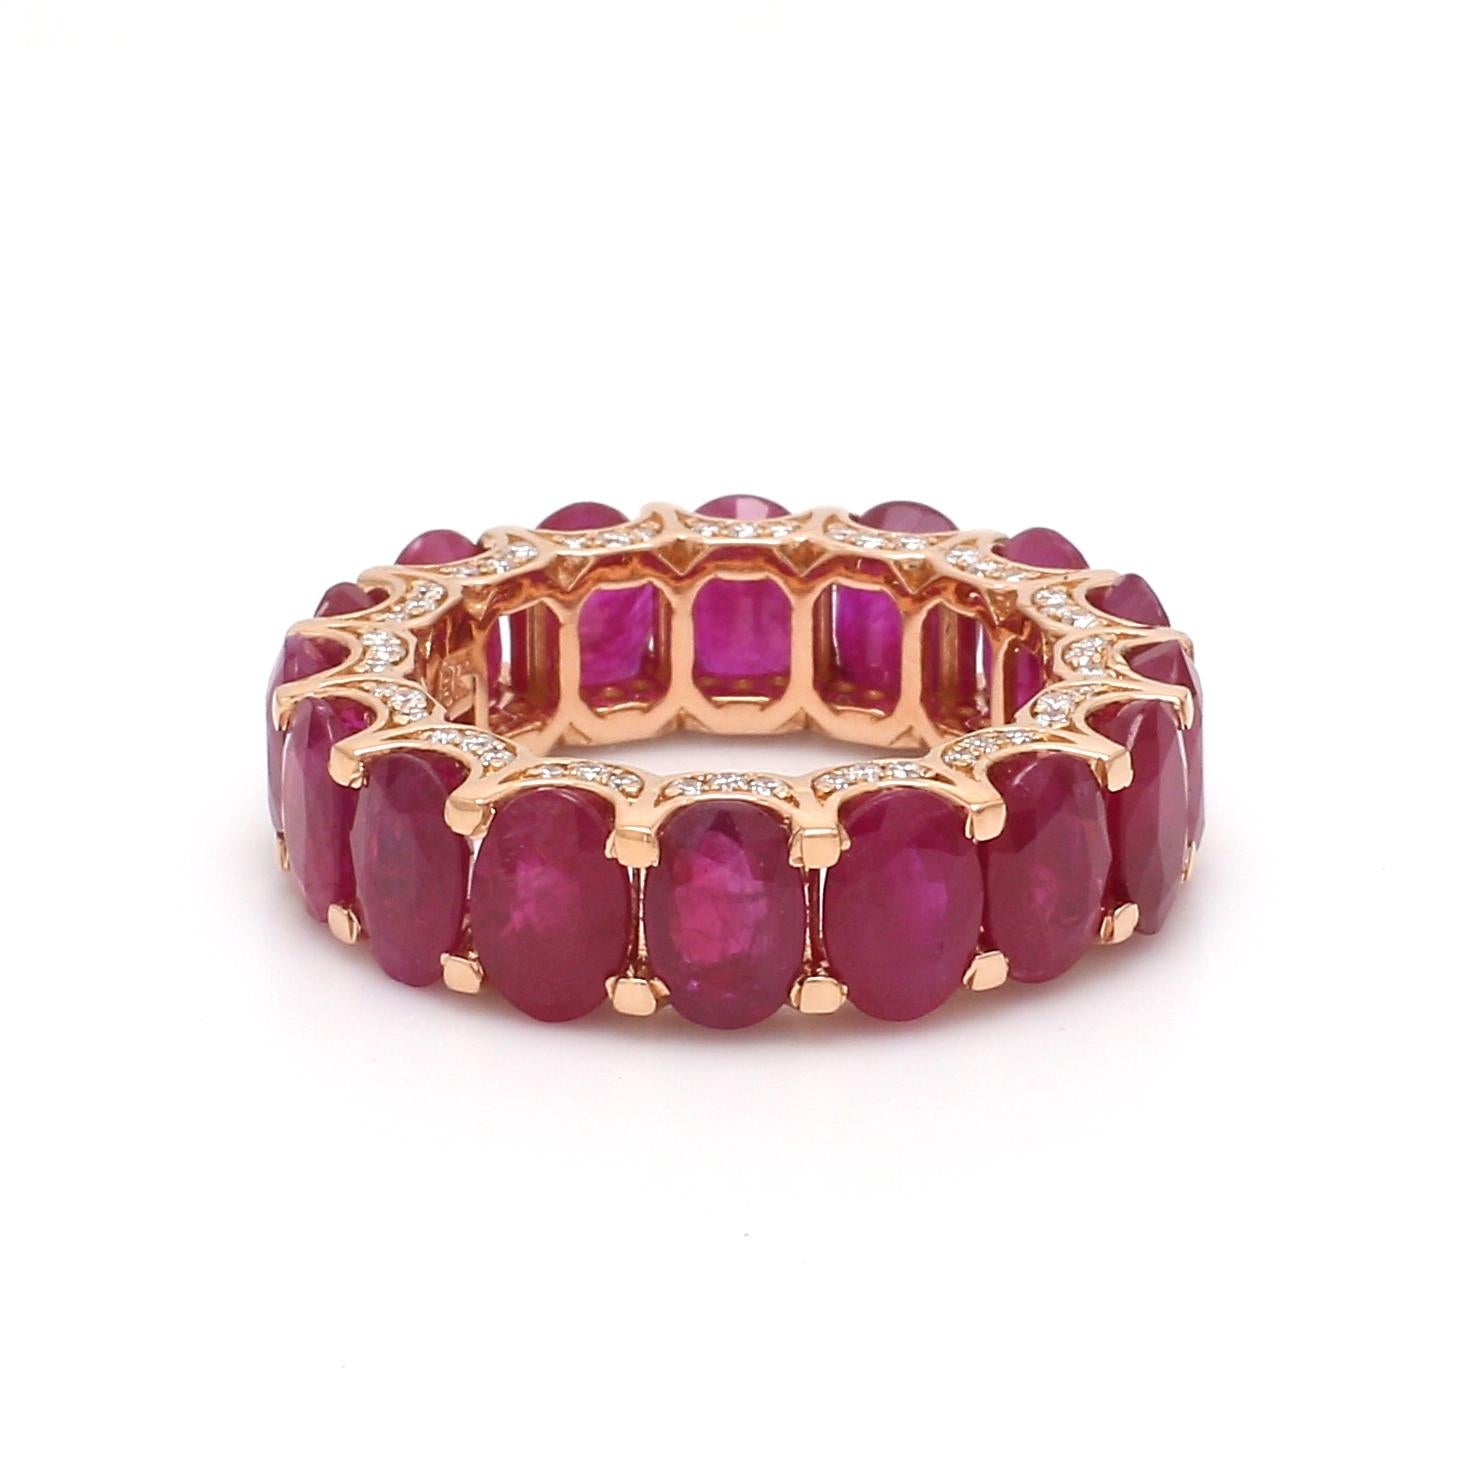 For Sale:  Natural Oval Ruby Gemstone Band Ring Diamond Pave 18k Rose Gold Fine Jewelry 3